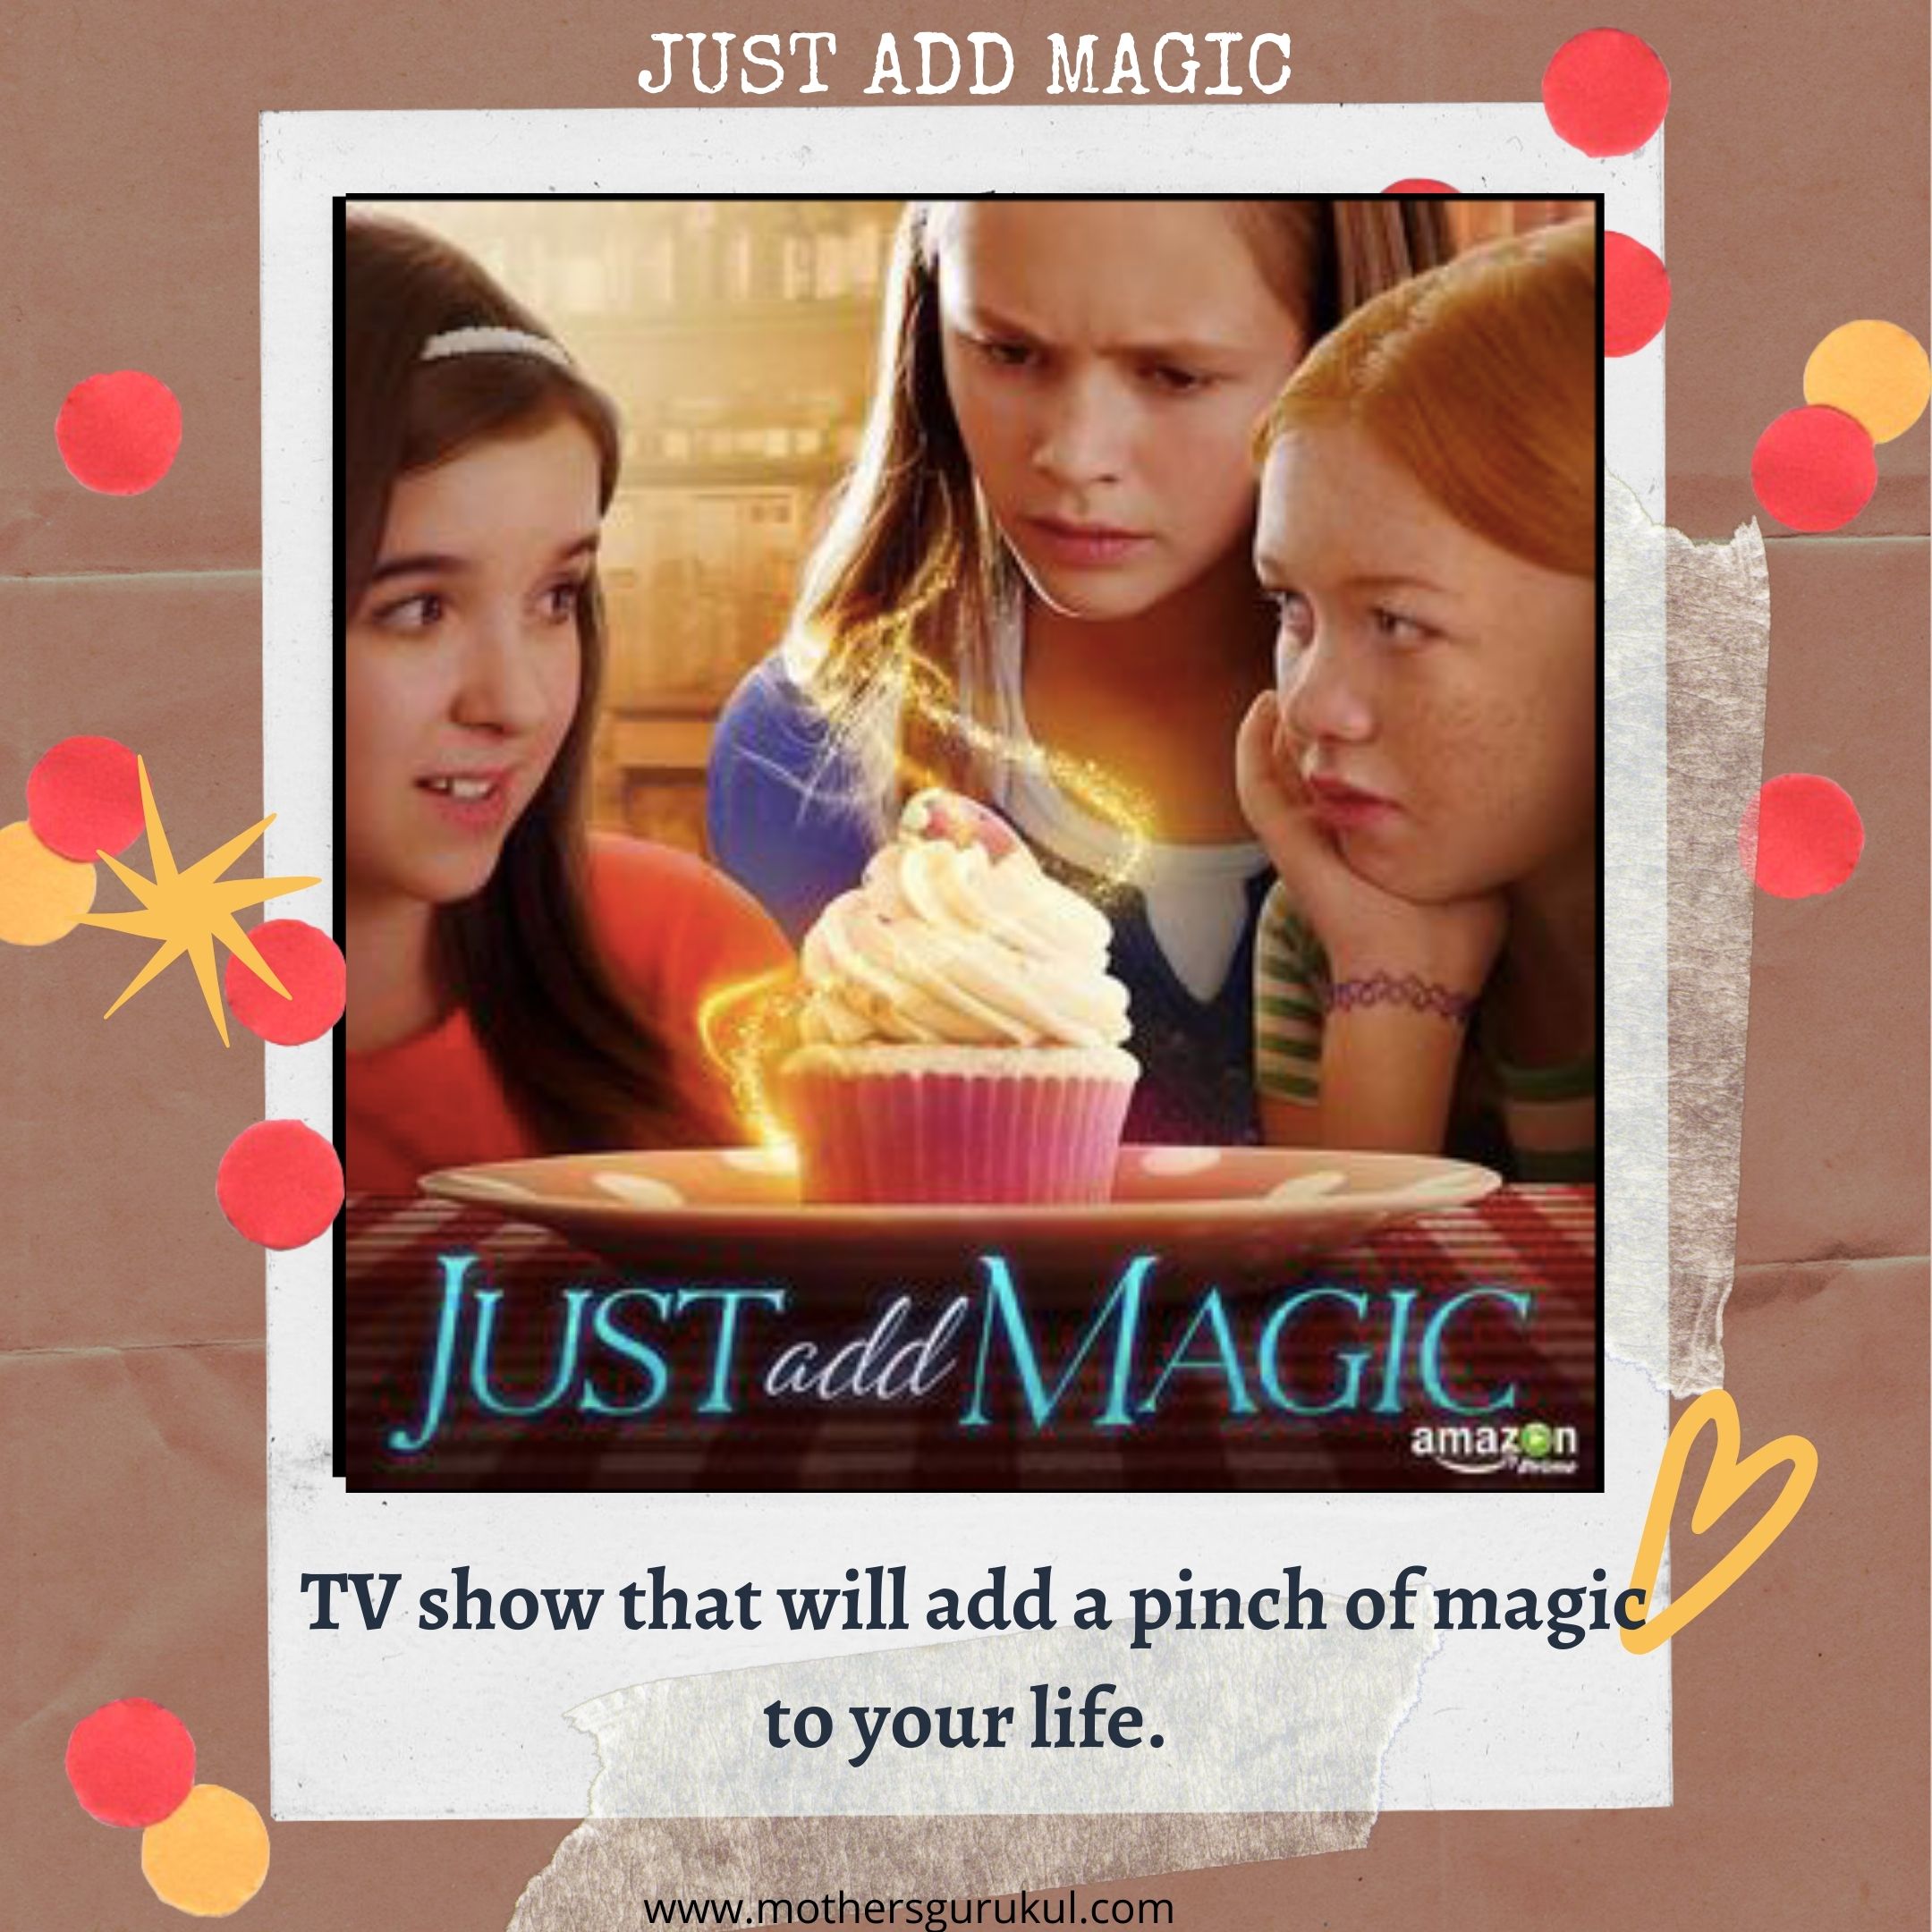 Just Add Magic:  Prime Video, magical spices chart!